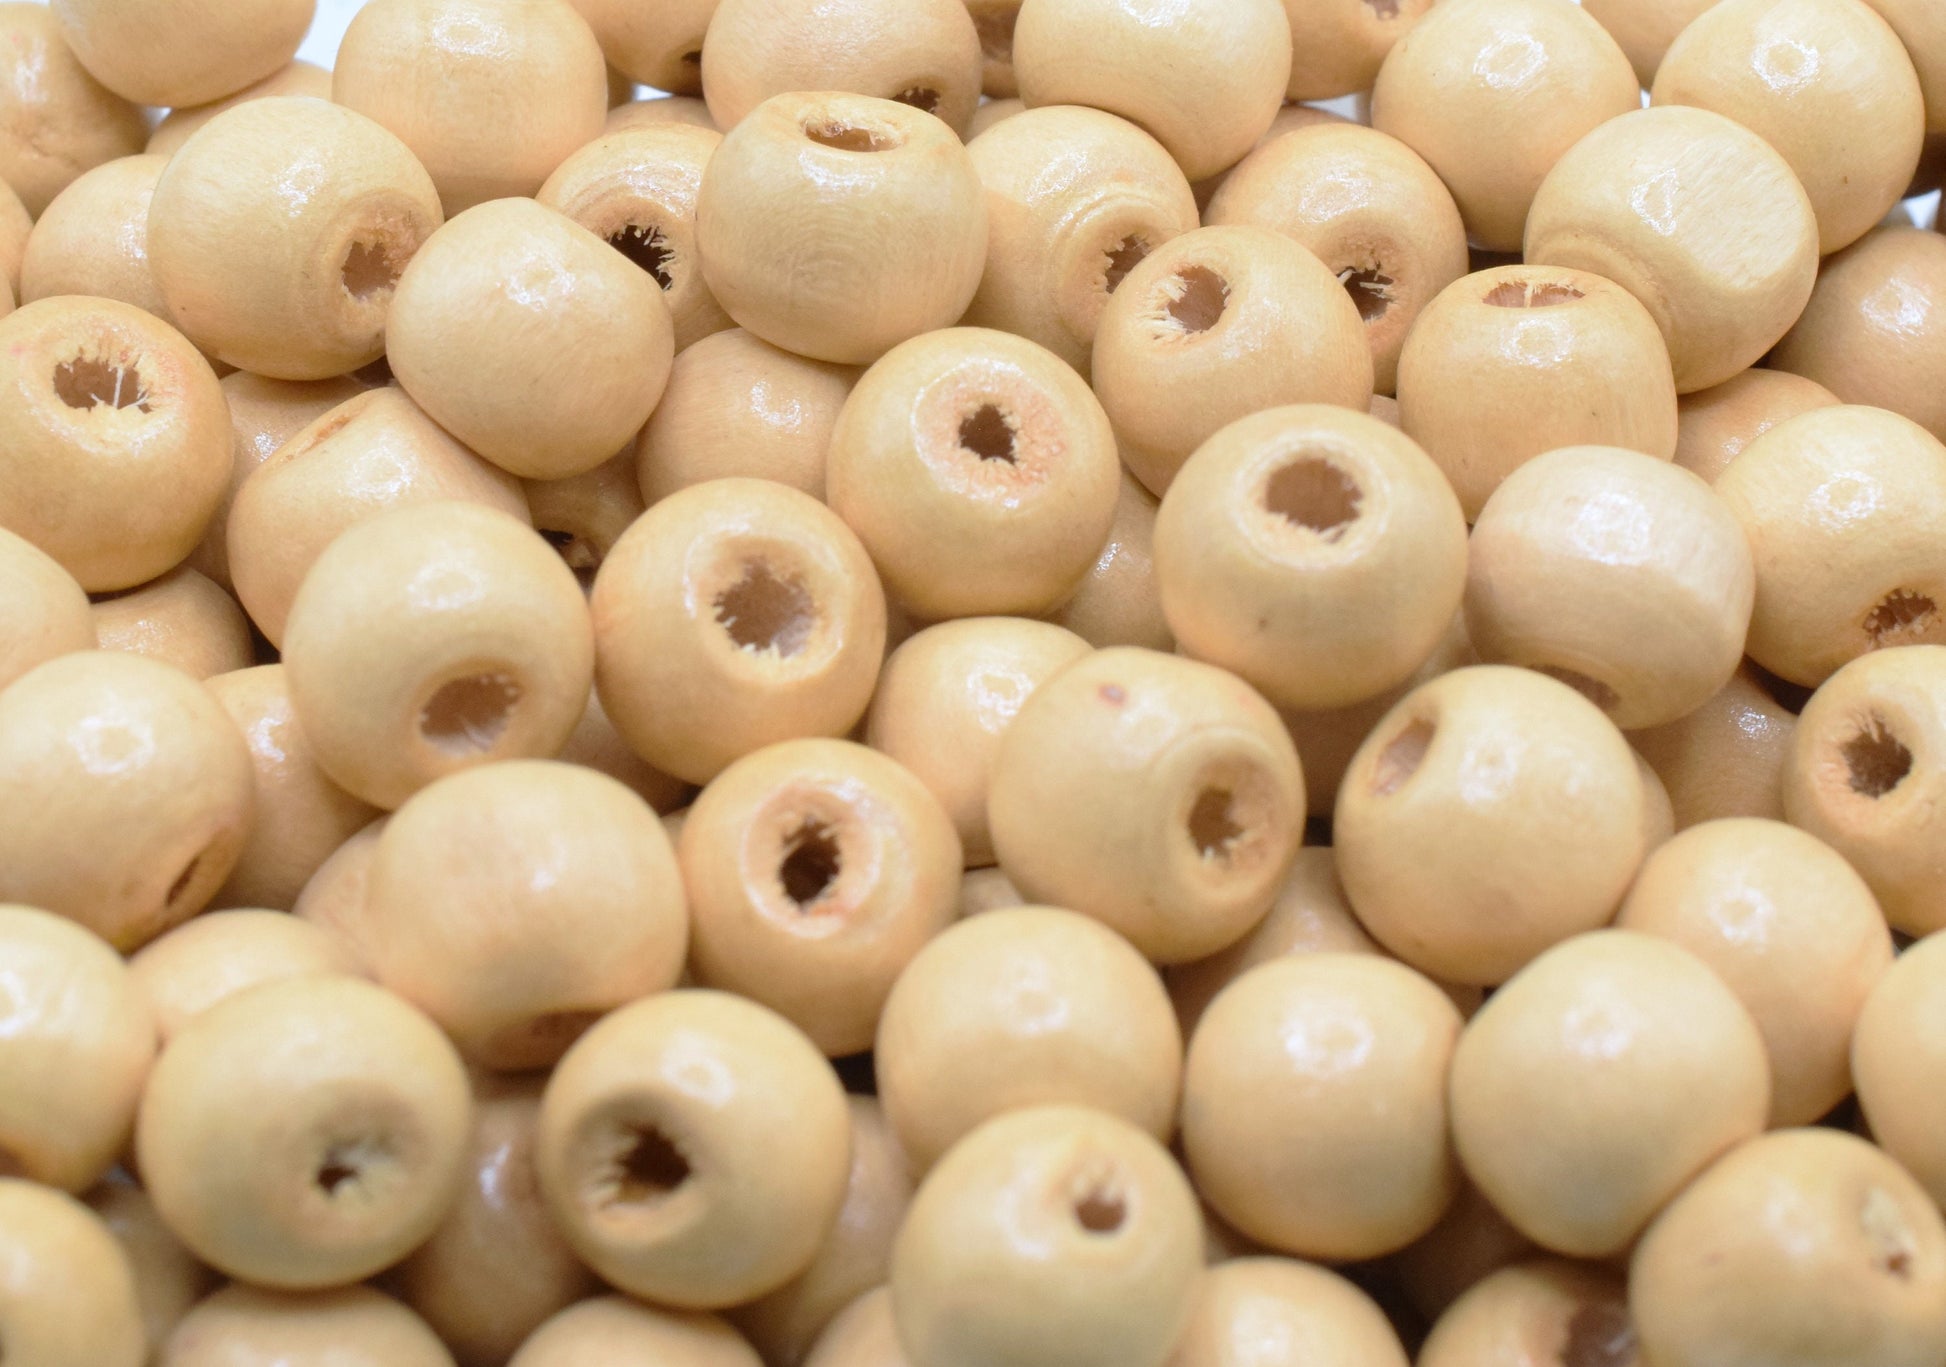 Wood Round Beads 1 Pound 16 colors Ball Boho Spacer Sizes 6mm, 8mm,10mm,12mm For Jewelry Making and Craft